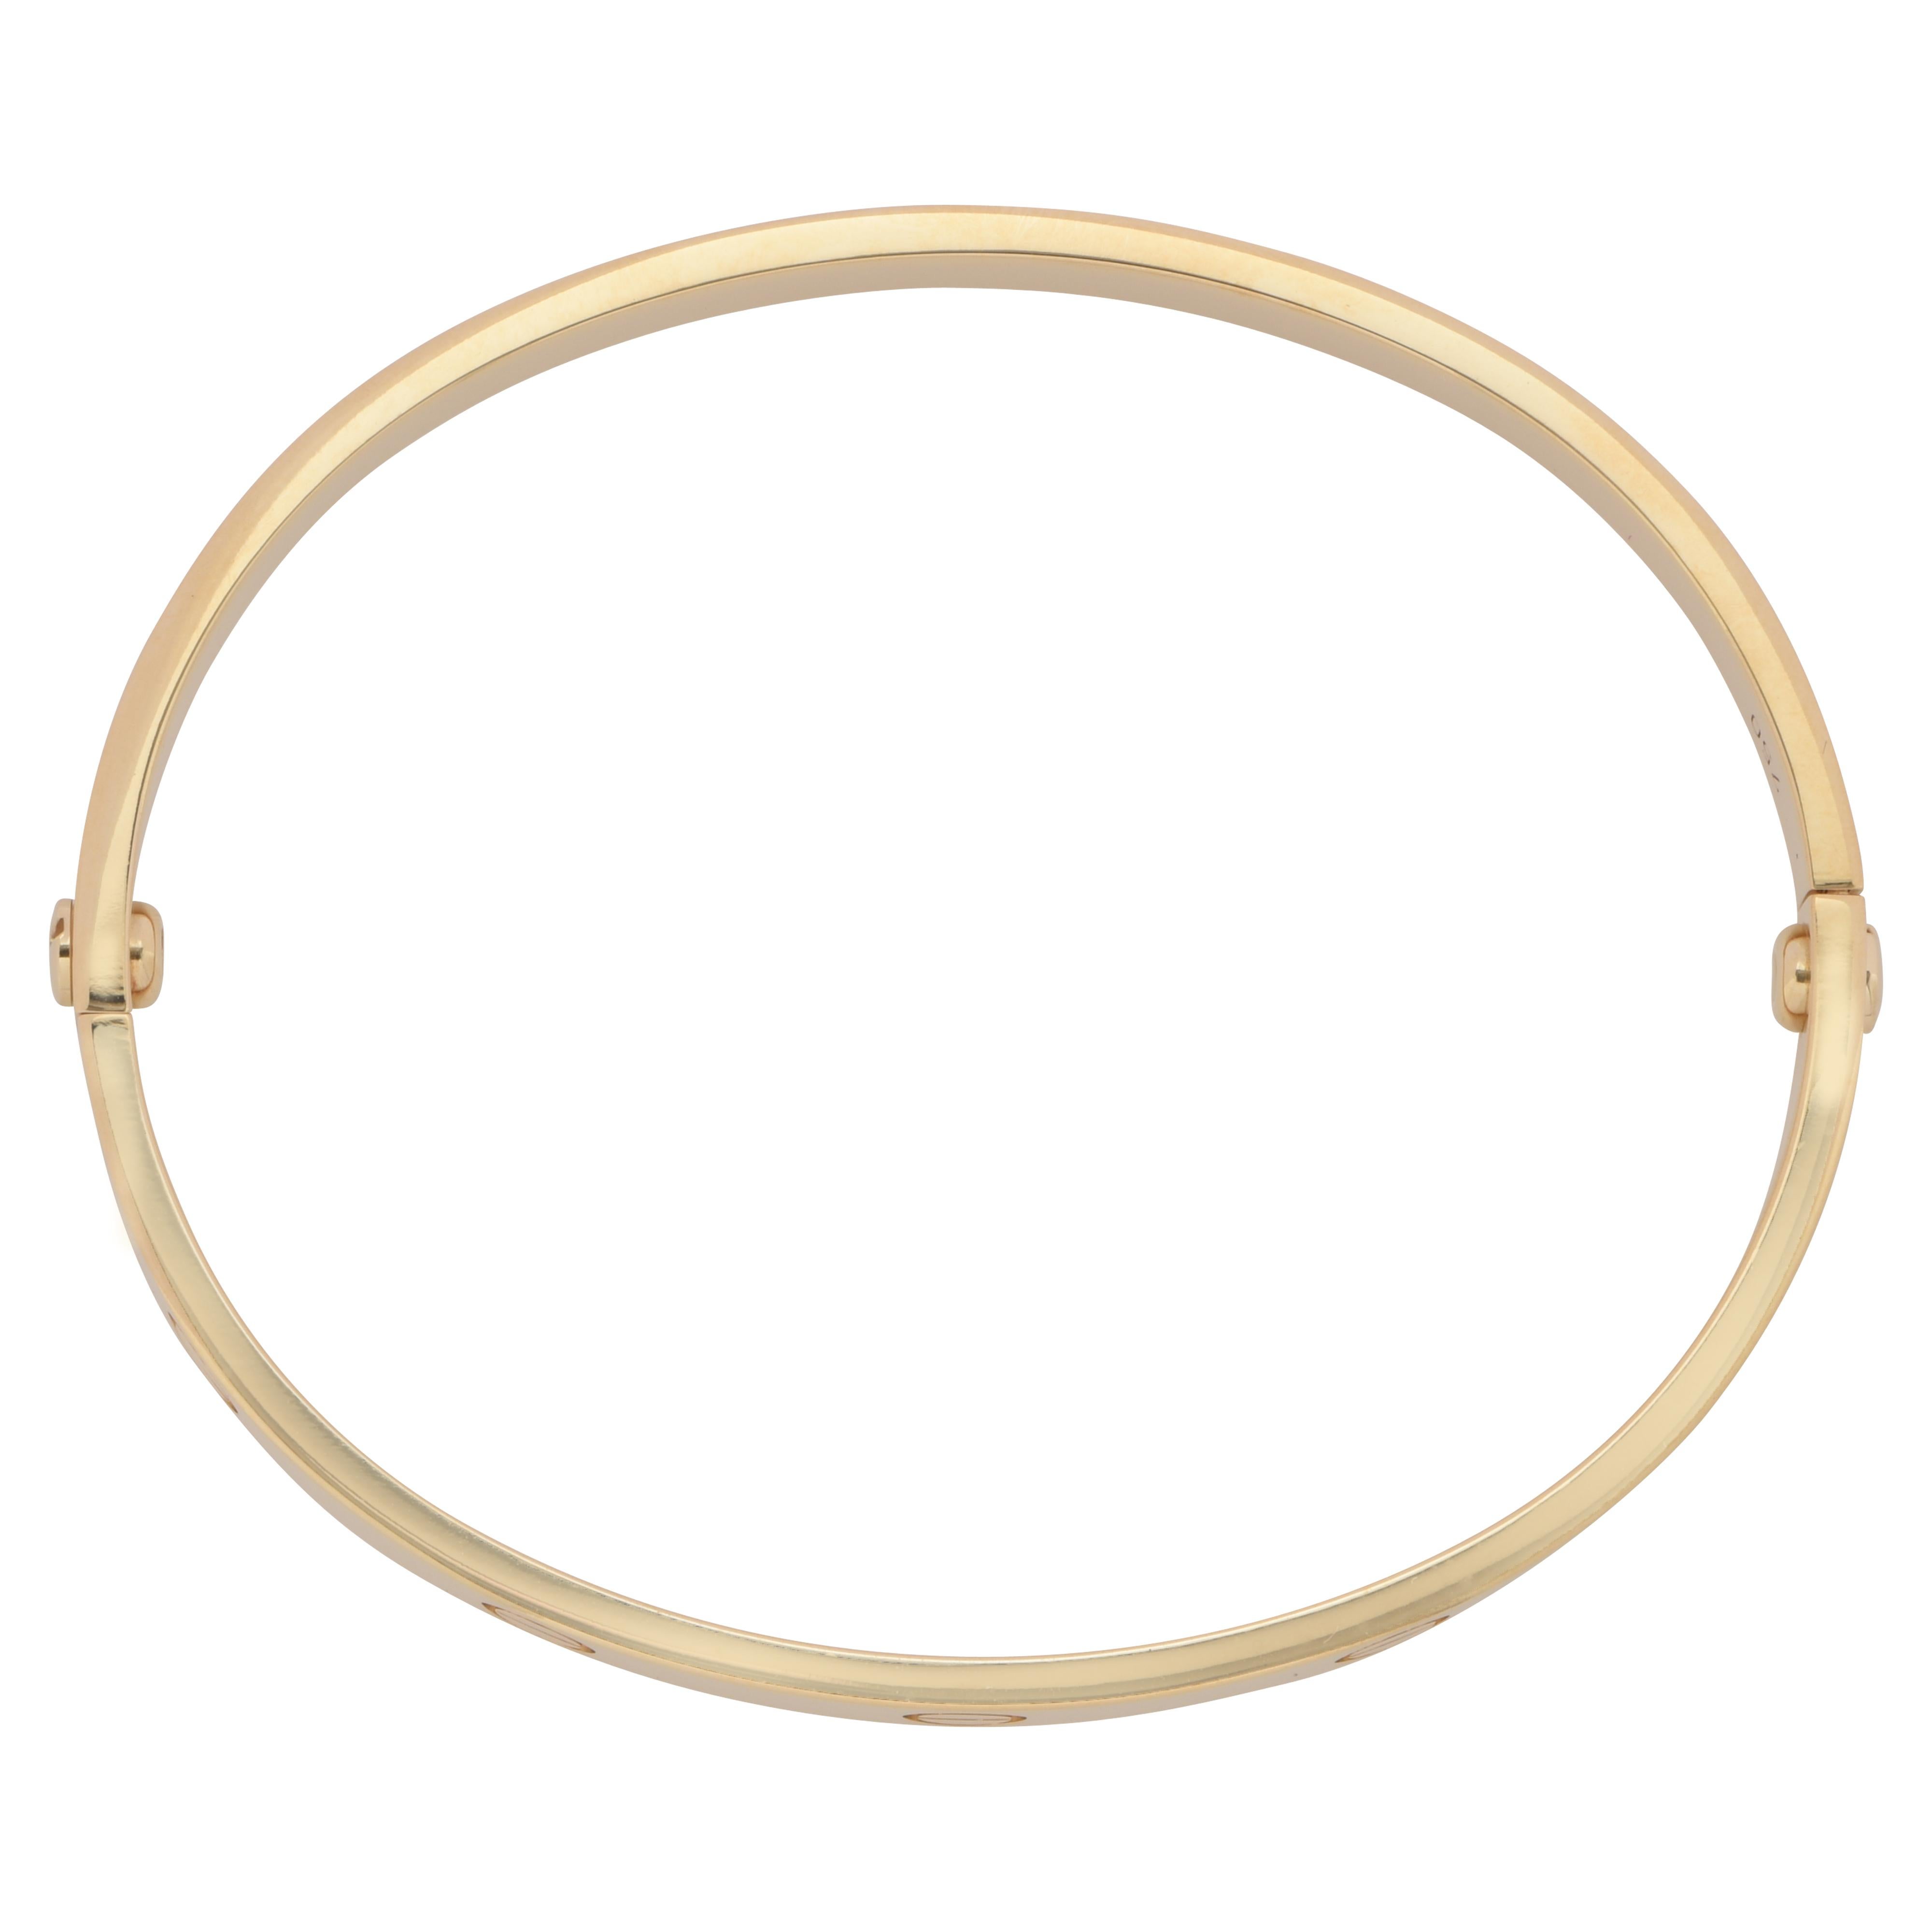 18 Karat yellow gold Cartier LOVE bracelet, Size 18. The Cartier love collection has created a timeless tribute to the symbol of love that transcends through an iconic style originating from the 1970s. The love collection screws and locks on to the